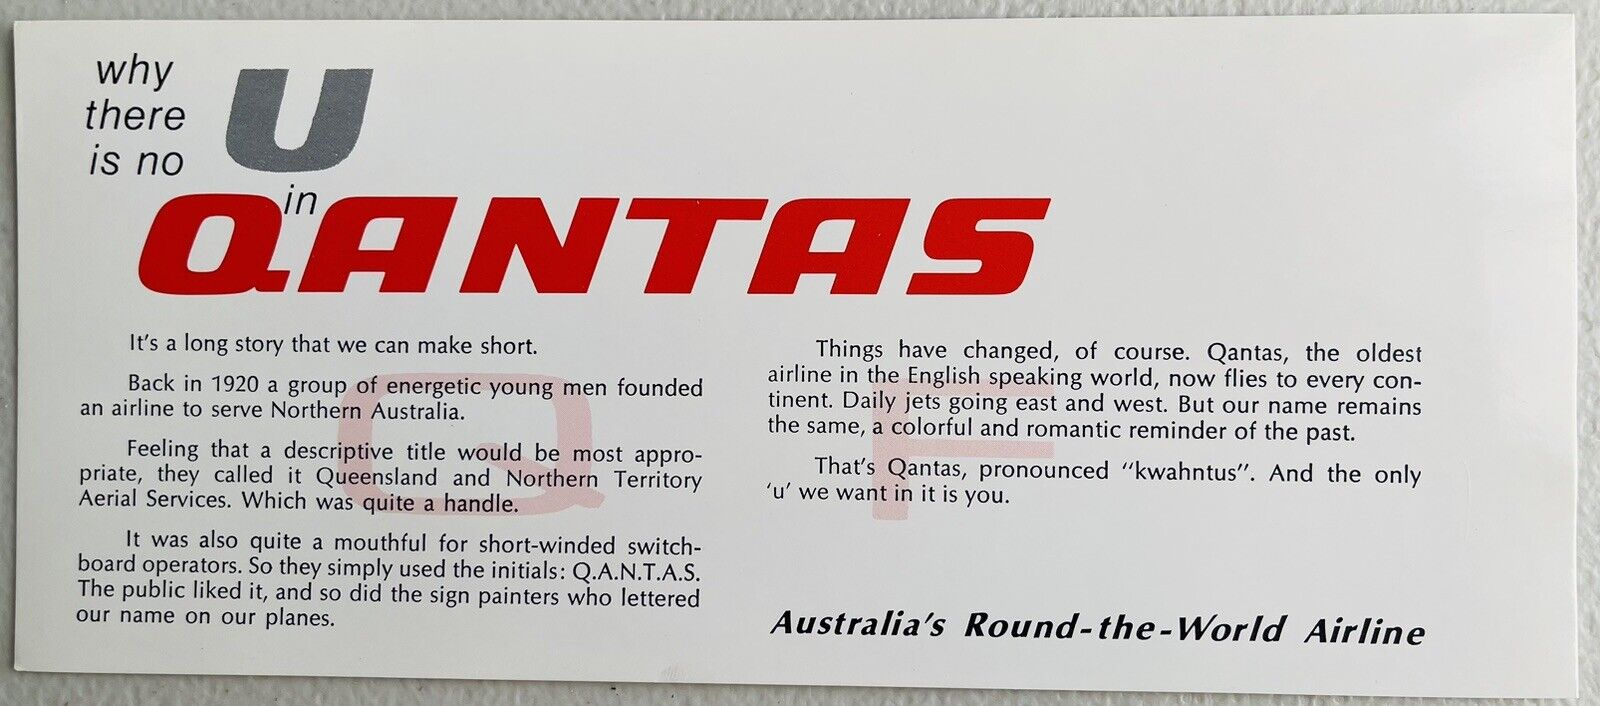 Qantas Airlines - Why There Is No U In Qantas - 1975